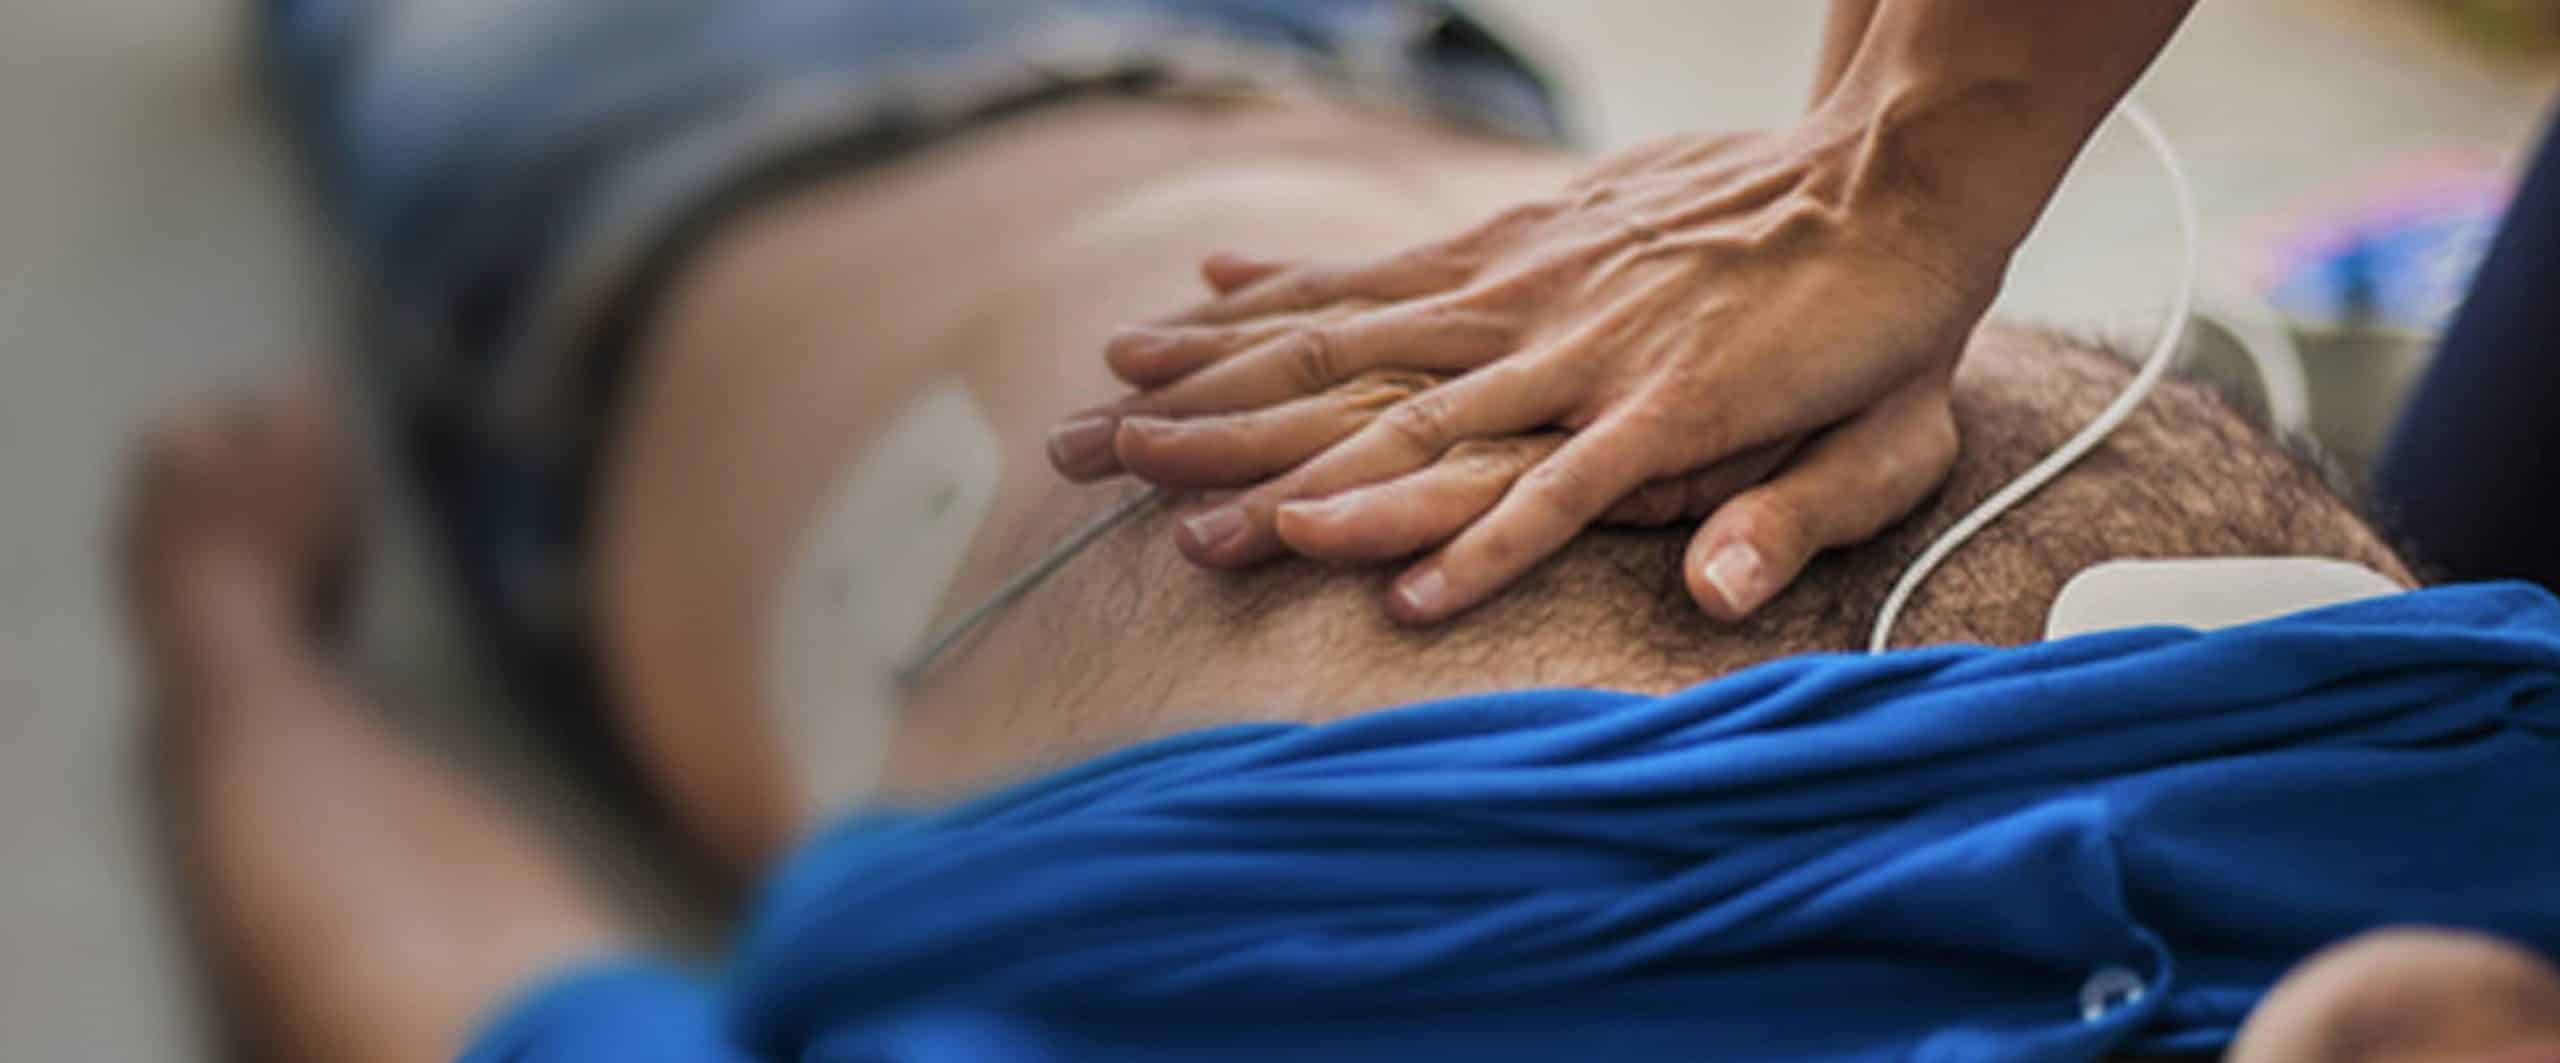 Close up of hands performing CPR on a patient